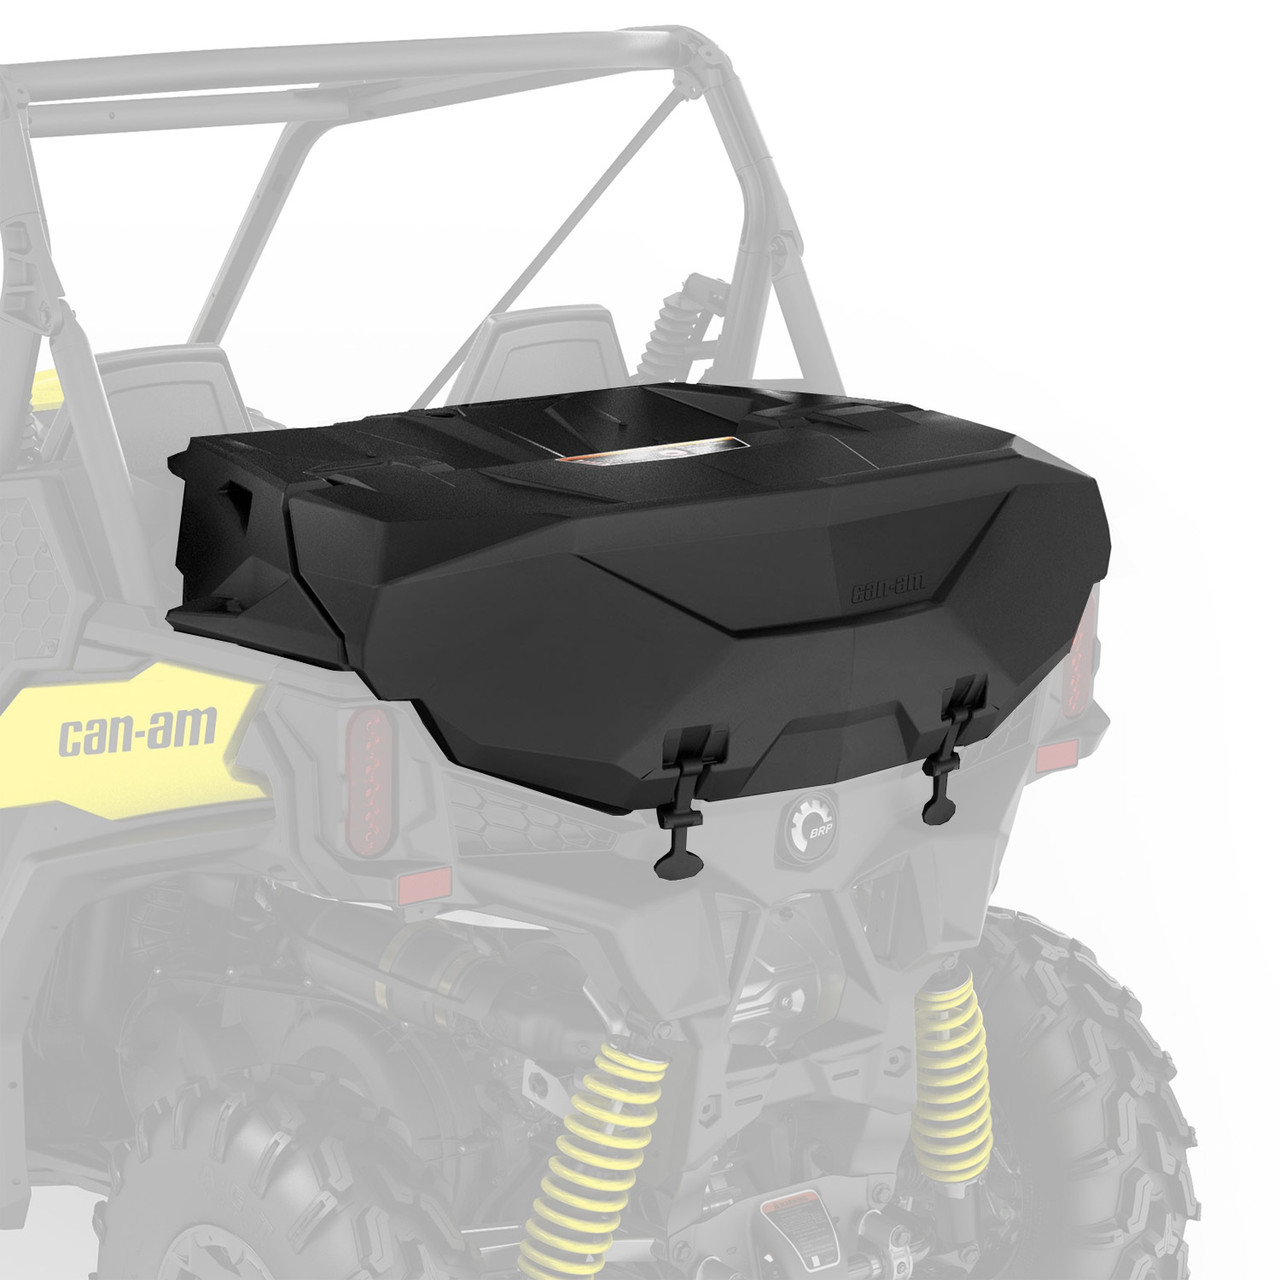 Can-Am New OEM, Maverick Weather Resistant All-Terrain Trunk Cover, 715003701